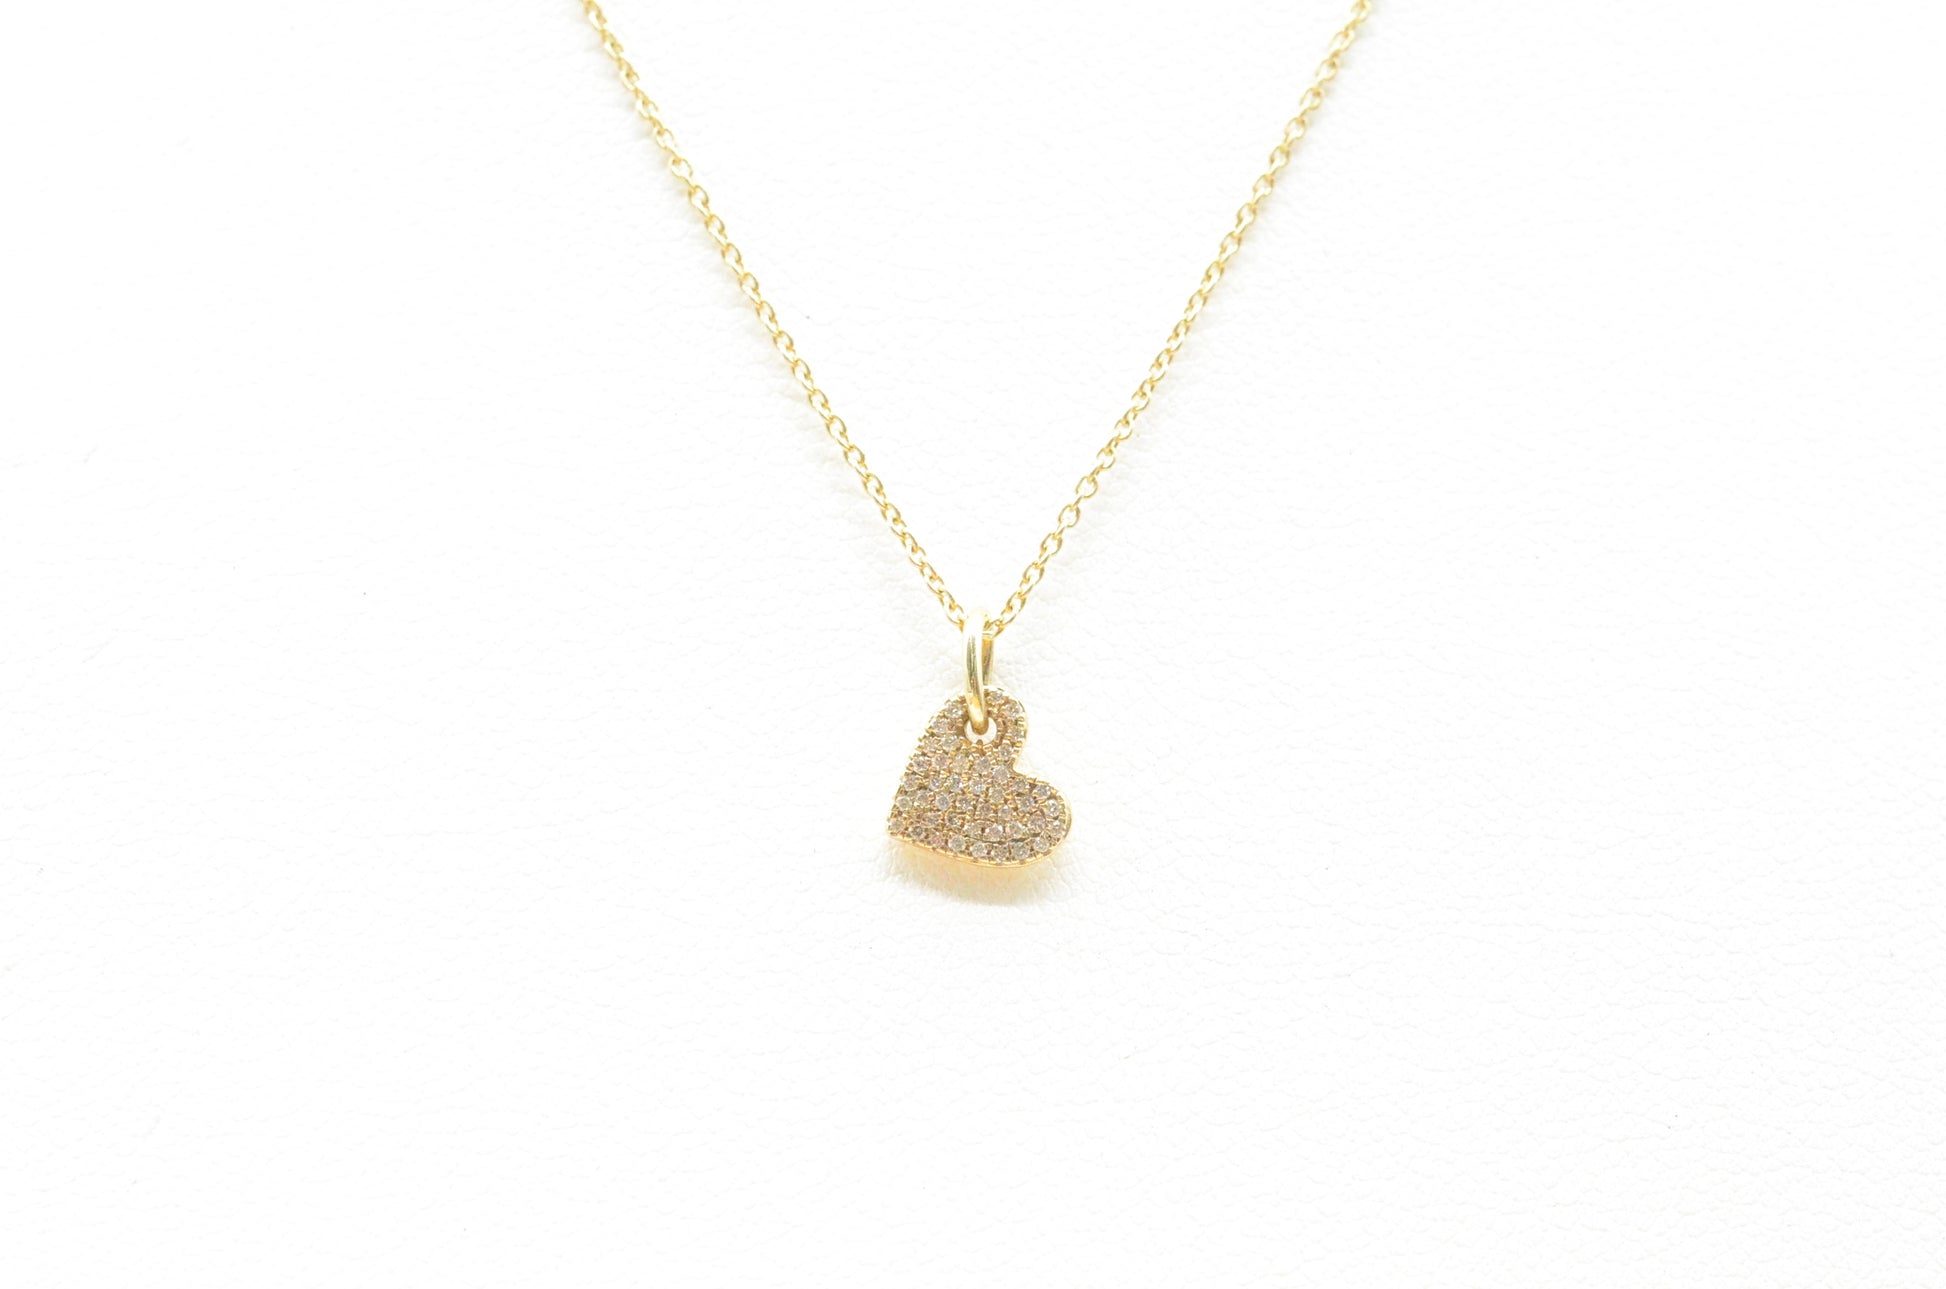 0.33" 0.09 cttw Diamond Heart Pendant W/18" Adjustable Cable Chain 14K Yellow Gold Hearts